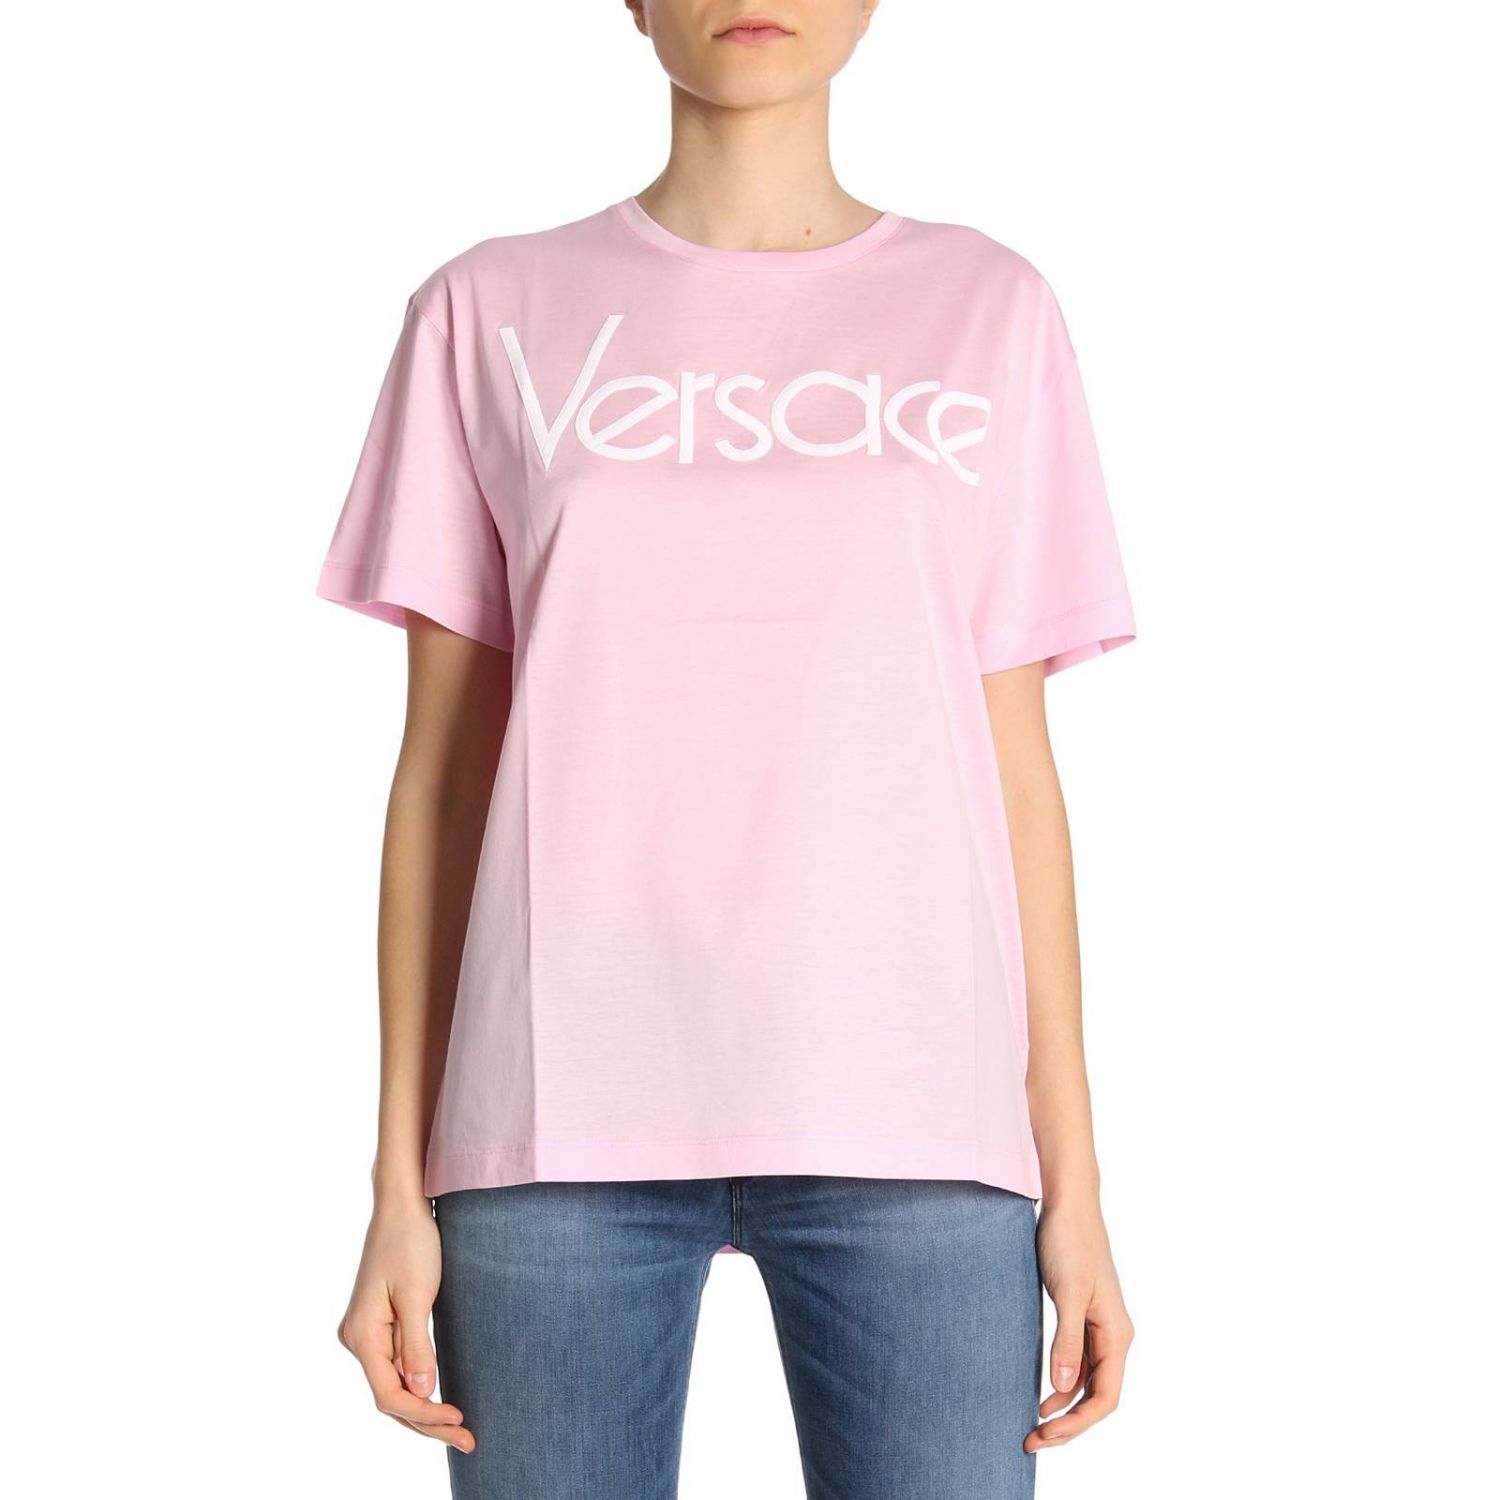 T-Shirt Versace A79760 A201952 Giglio UK